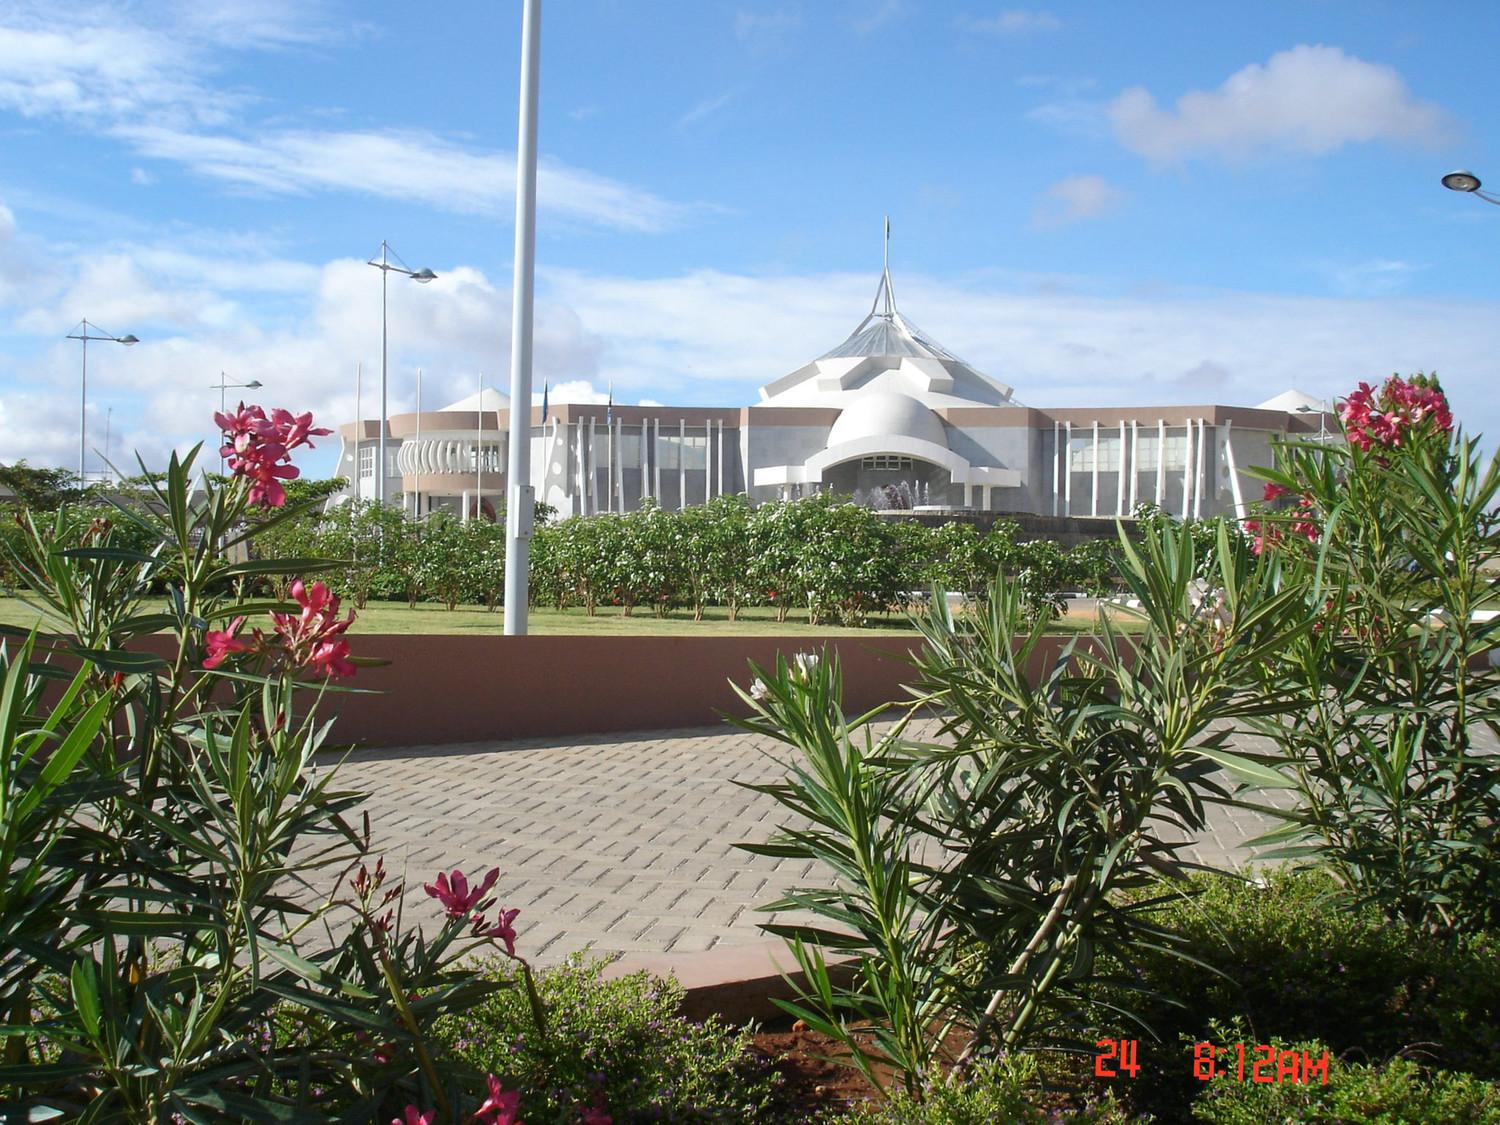 Front view of the Tanzania Parliament